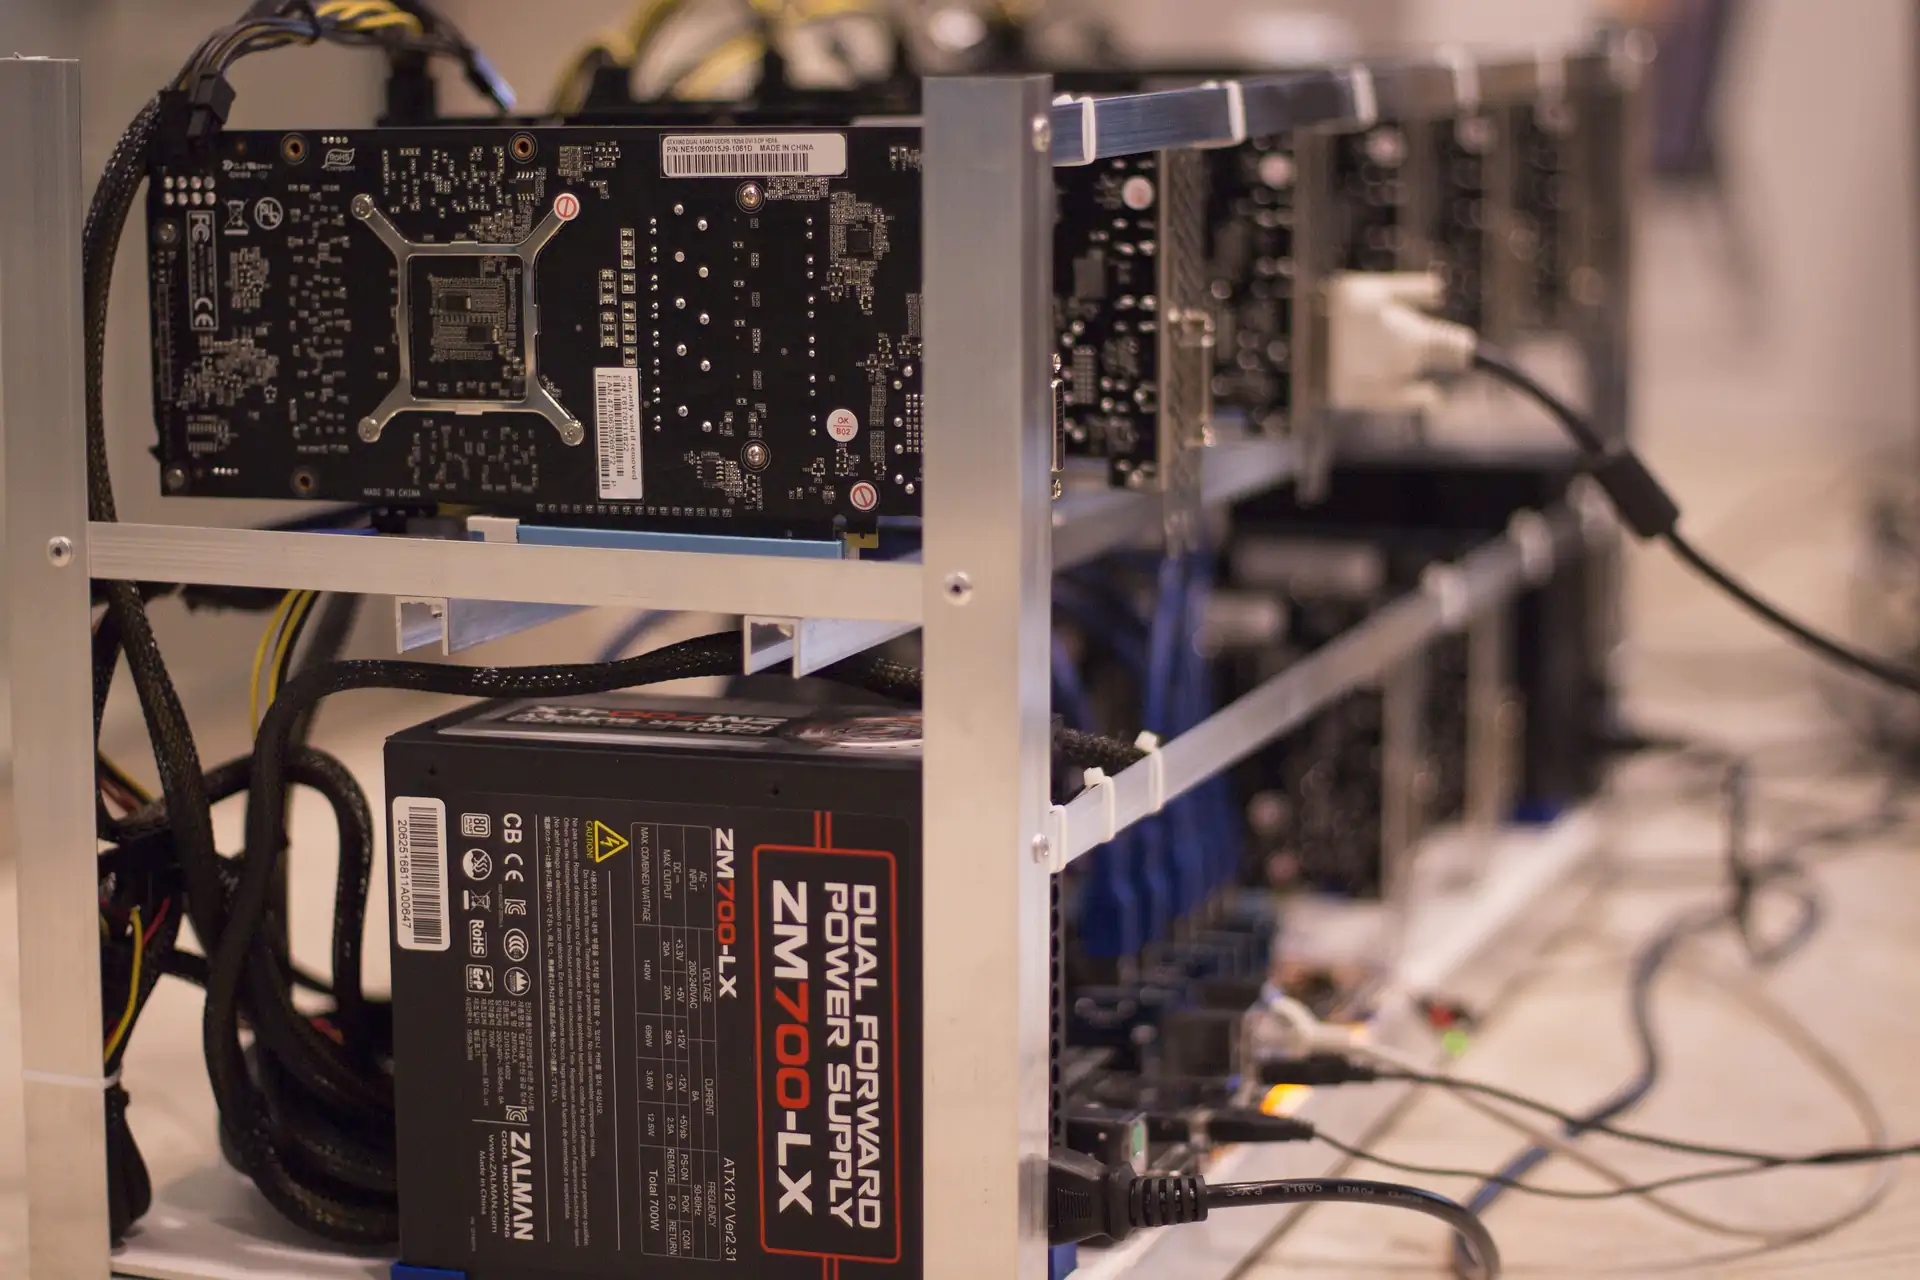 Data Shows 50% Of Bitcoin Hashrate Controlled By Two Mining Pools